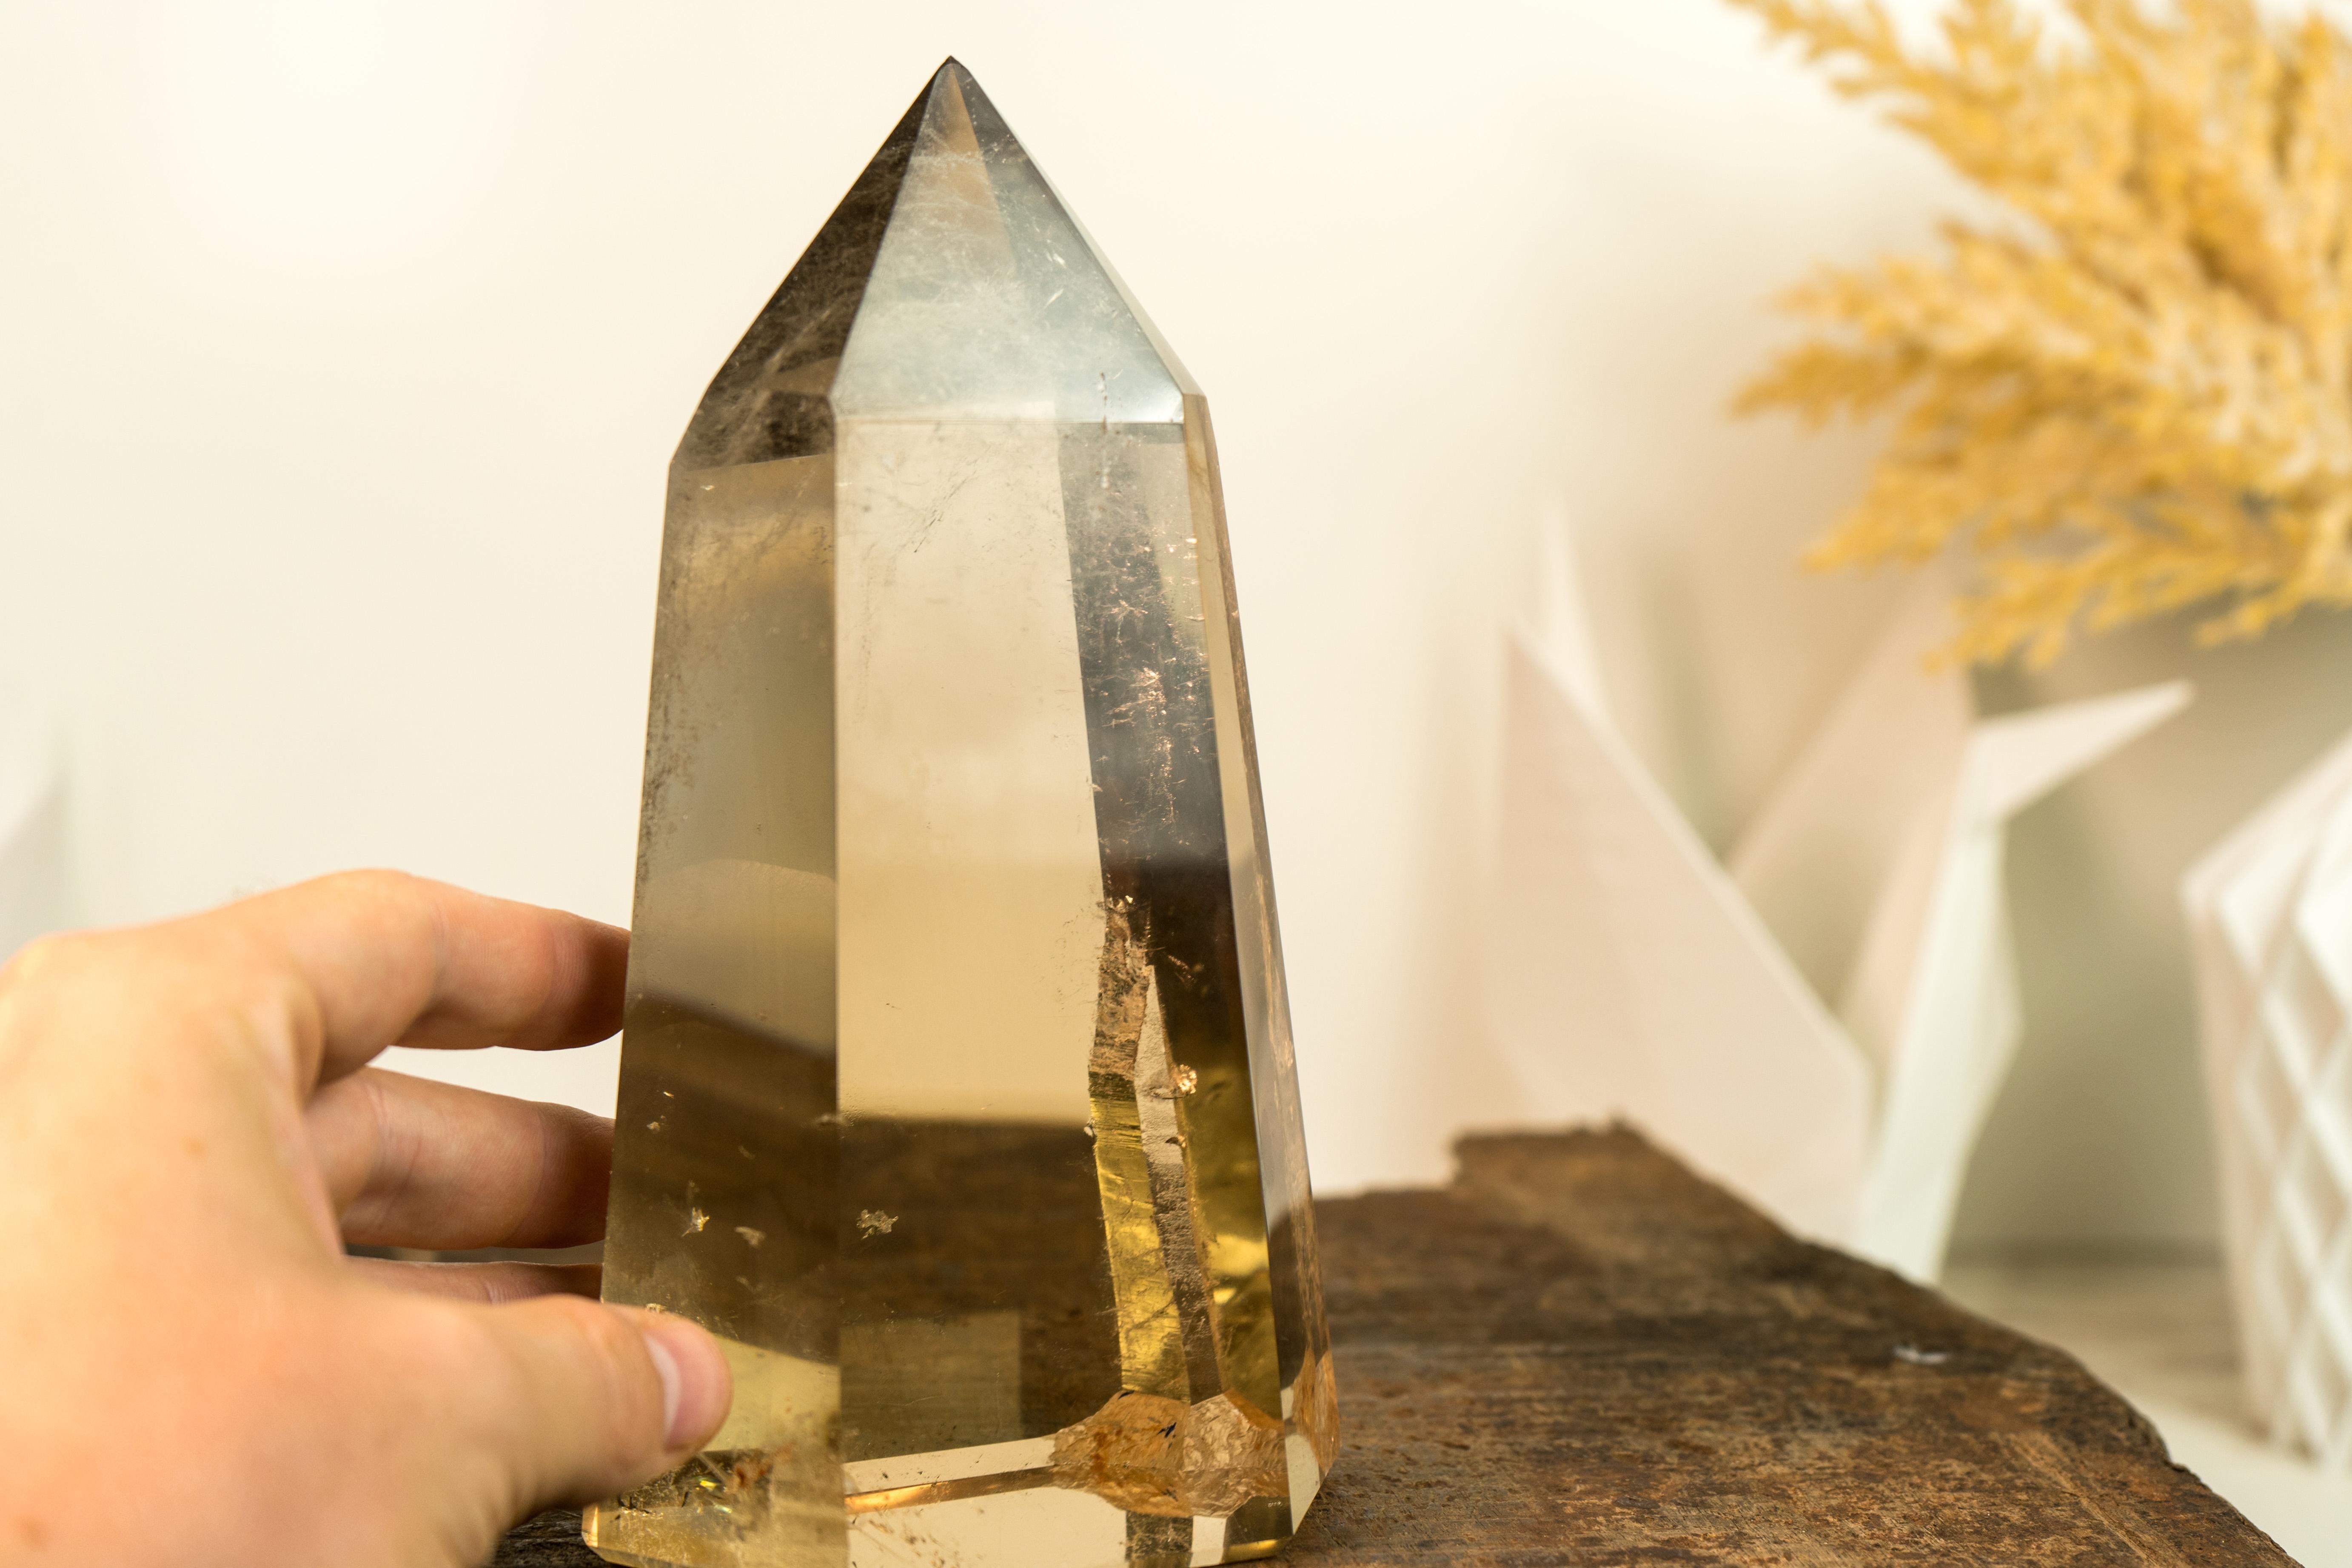 AAA Natural Honey Orange Citrine Obelisk Tower: A Display of Exceptional Water-Clear Citrine Crystal

▫️ Description

Standing tall in its obelisk tower form, this natural citrine is an outstanding sculpture that blends Nature's perfect crystal with